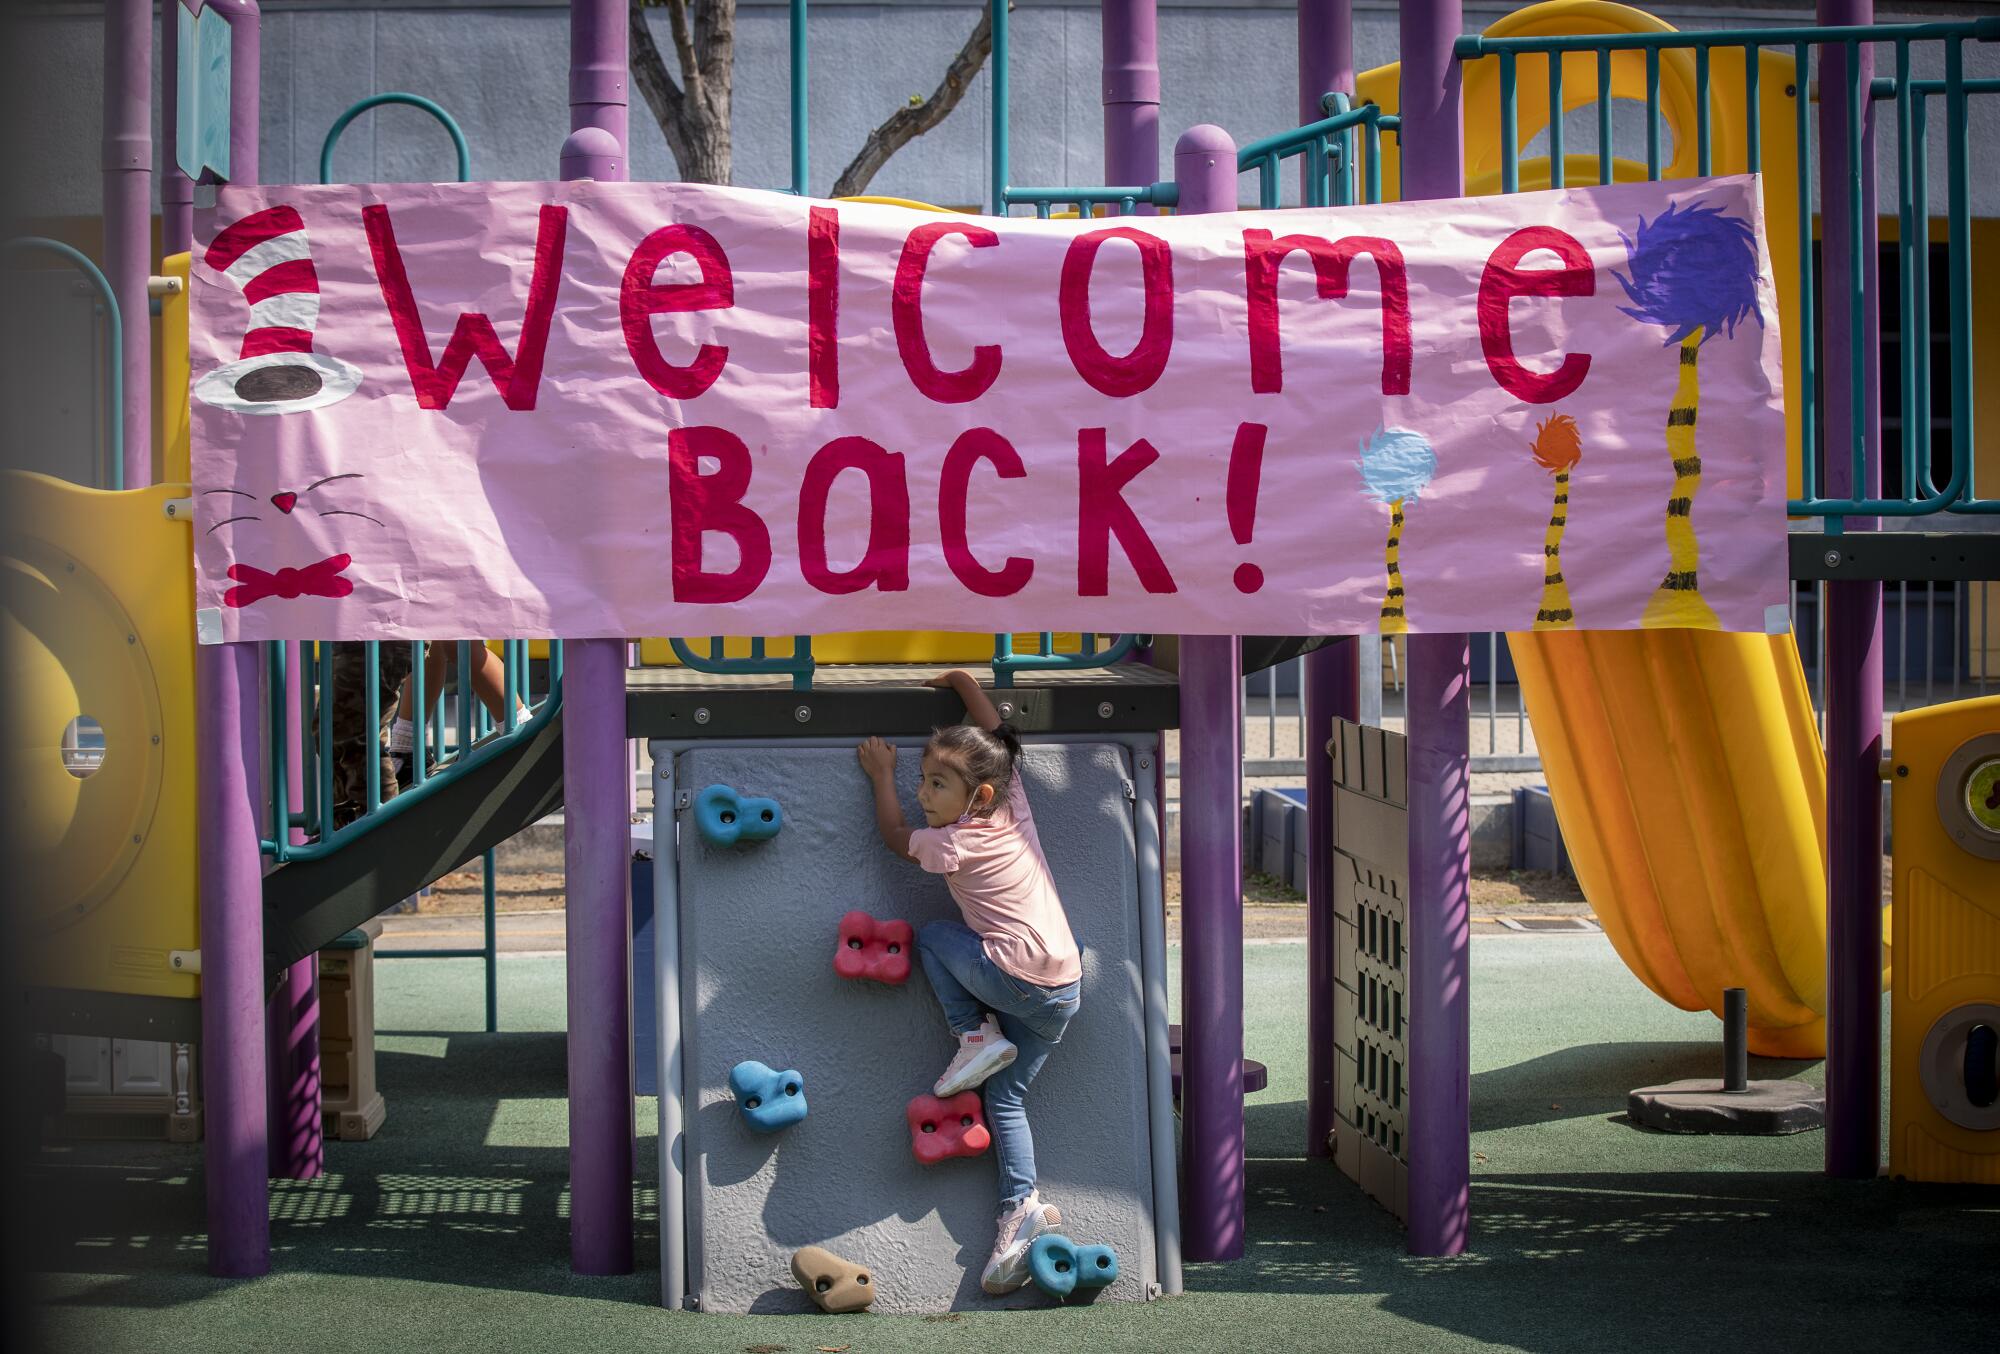 A child climbs on playground equipment underneath a giant Welcome Back banner